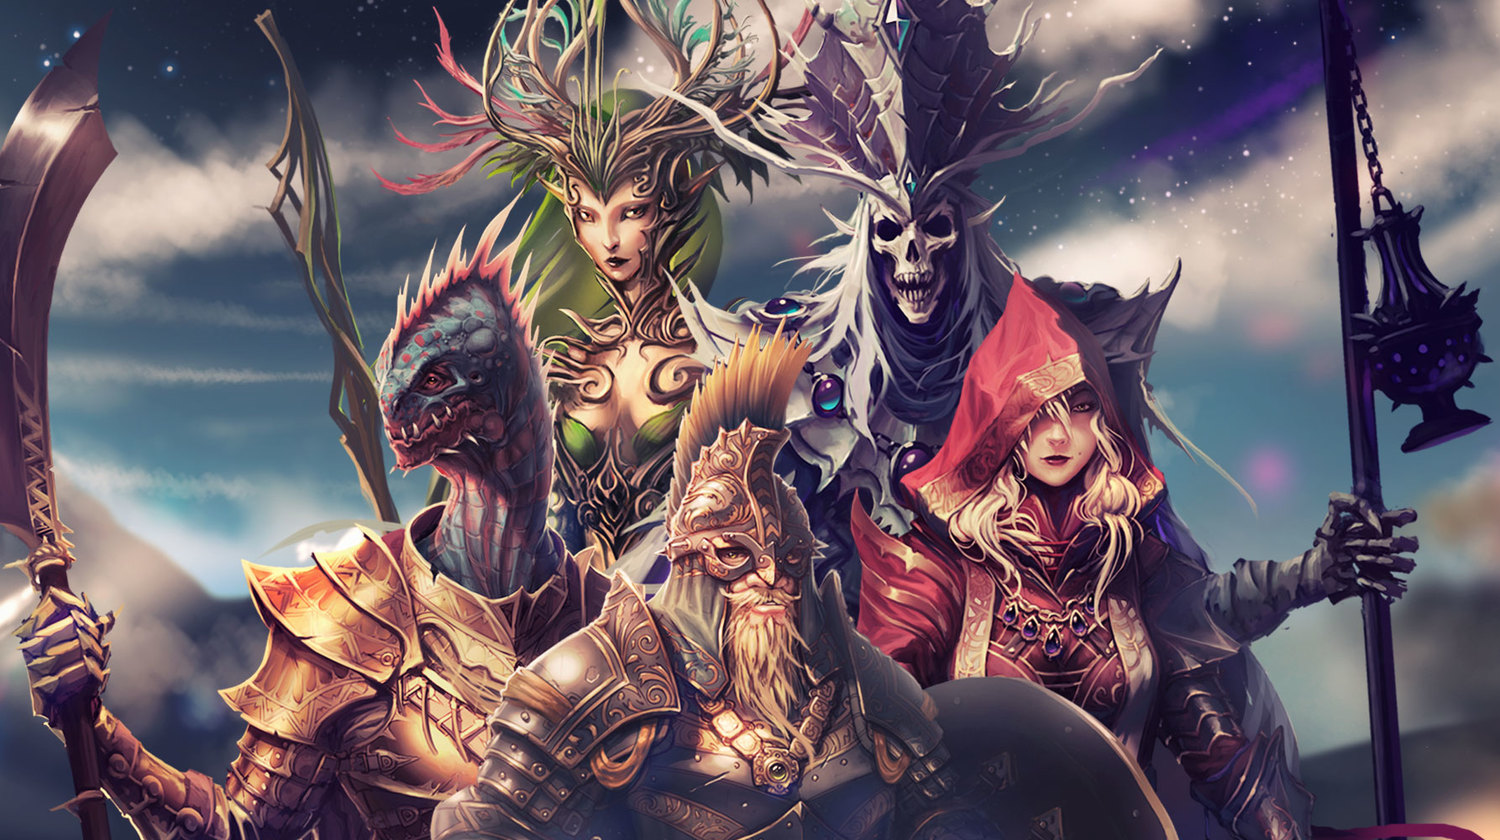 Best co-op games - Divinity: Original Sin 2 concept art of the five playable characters